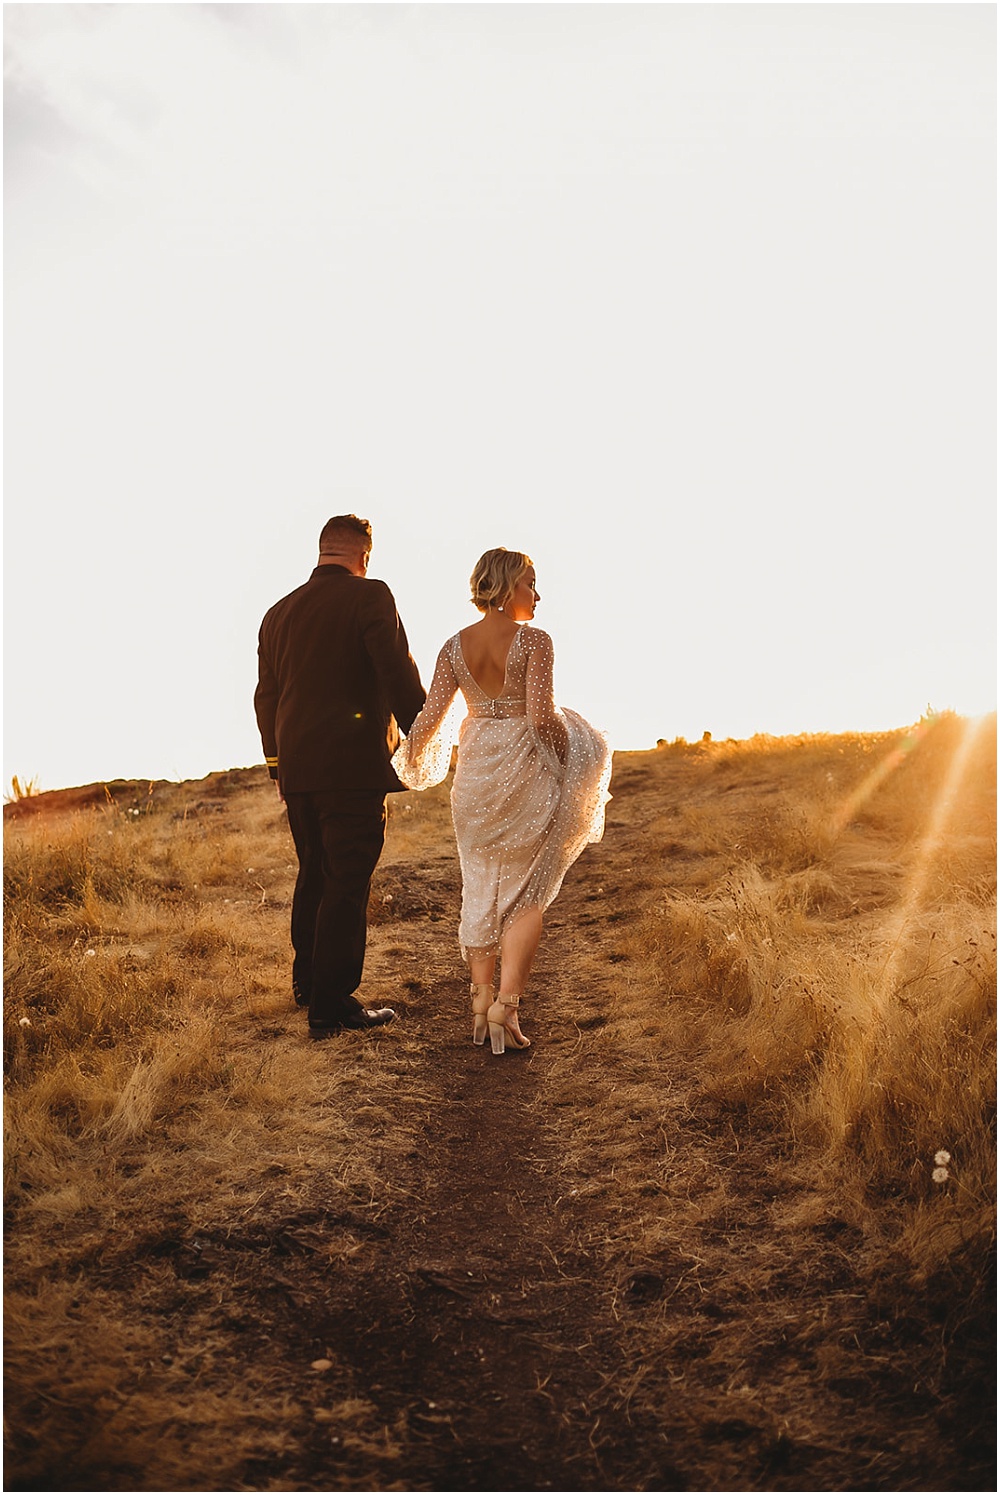 Bride and groom walking in field at sunset